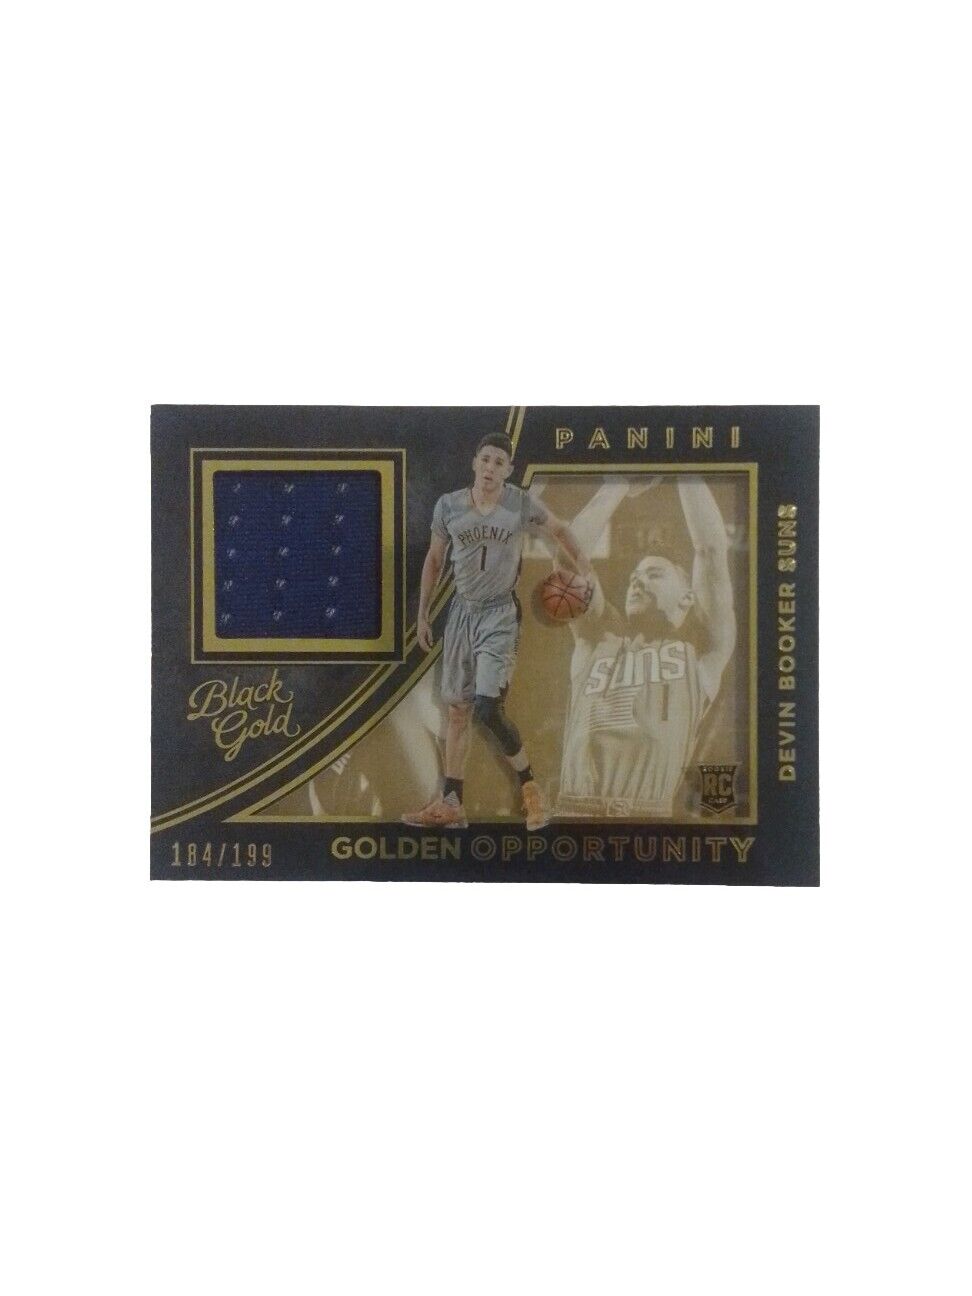 /99 Devin BOOKER 2015-16 Panini BLACK GOLD Golden Opportunity RC JERSEY No Car